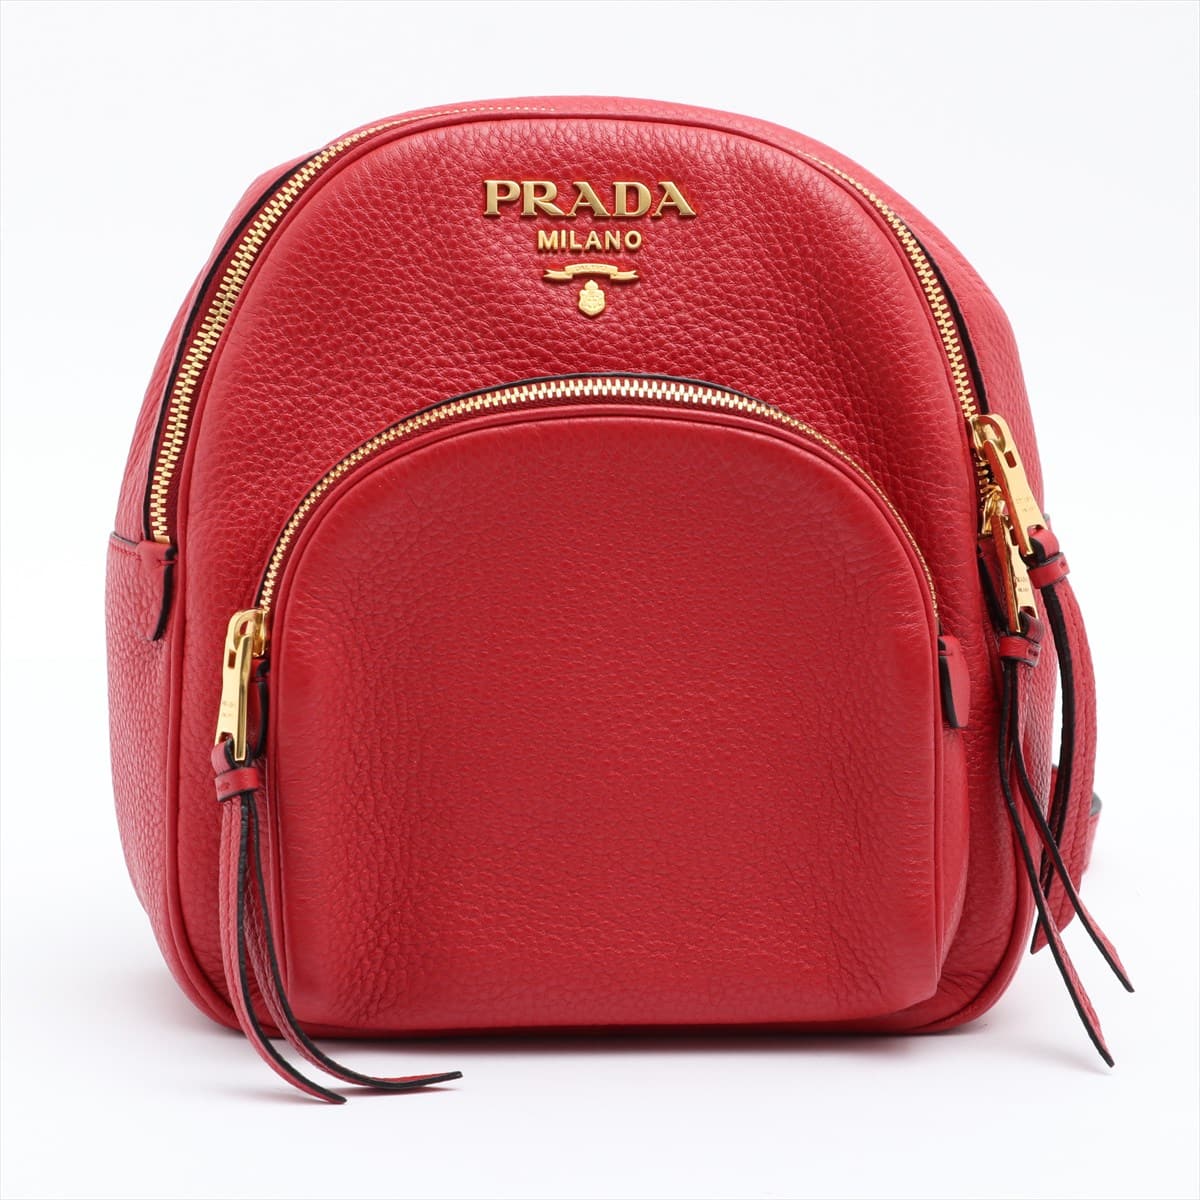 Prada Vitello Daino Leather Backpack Red 1BZ051 open papers strap x2